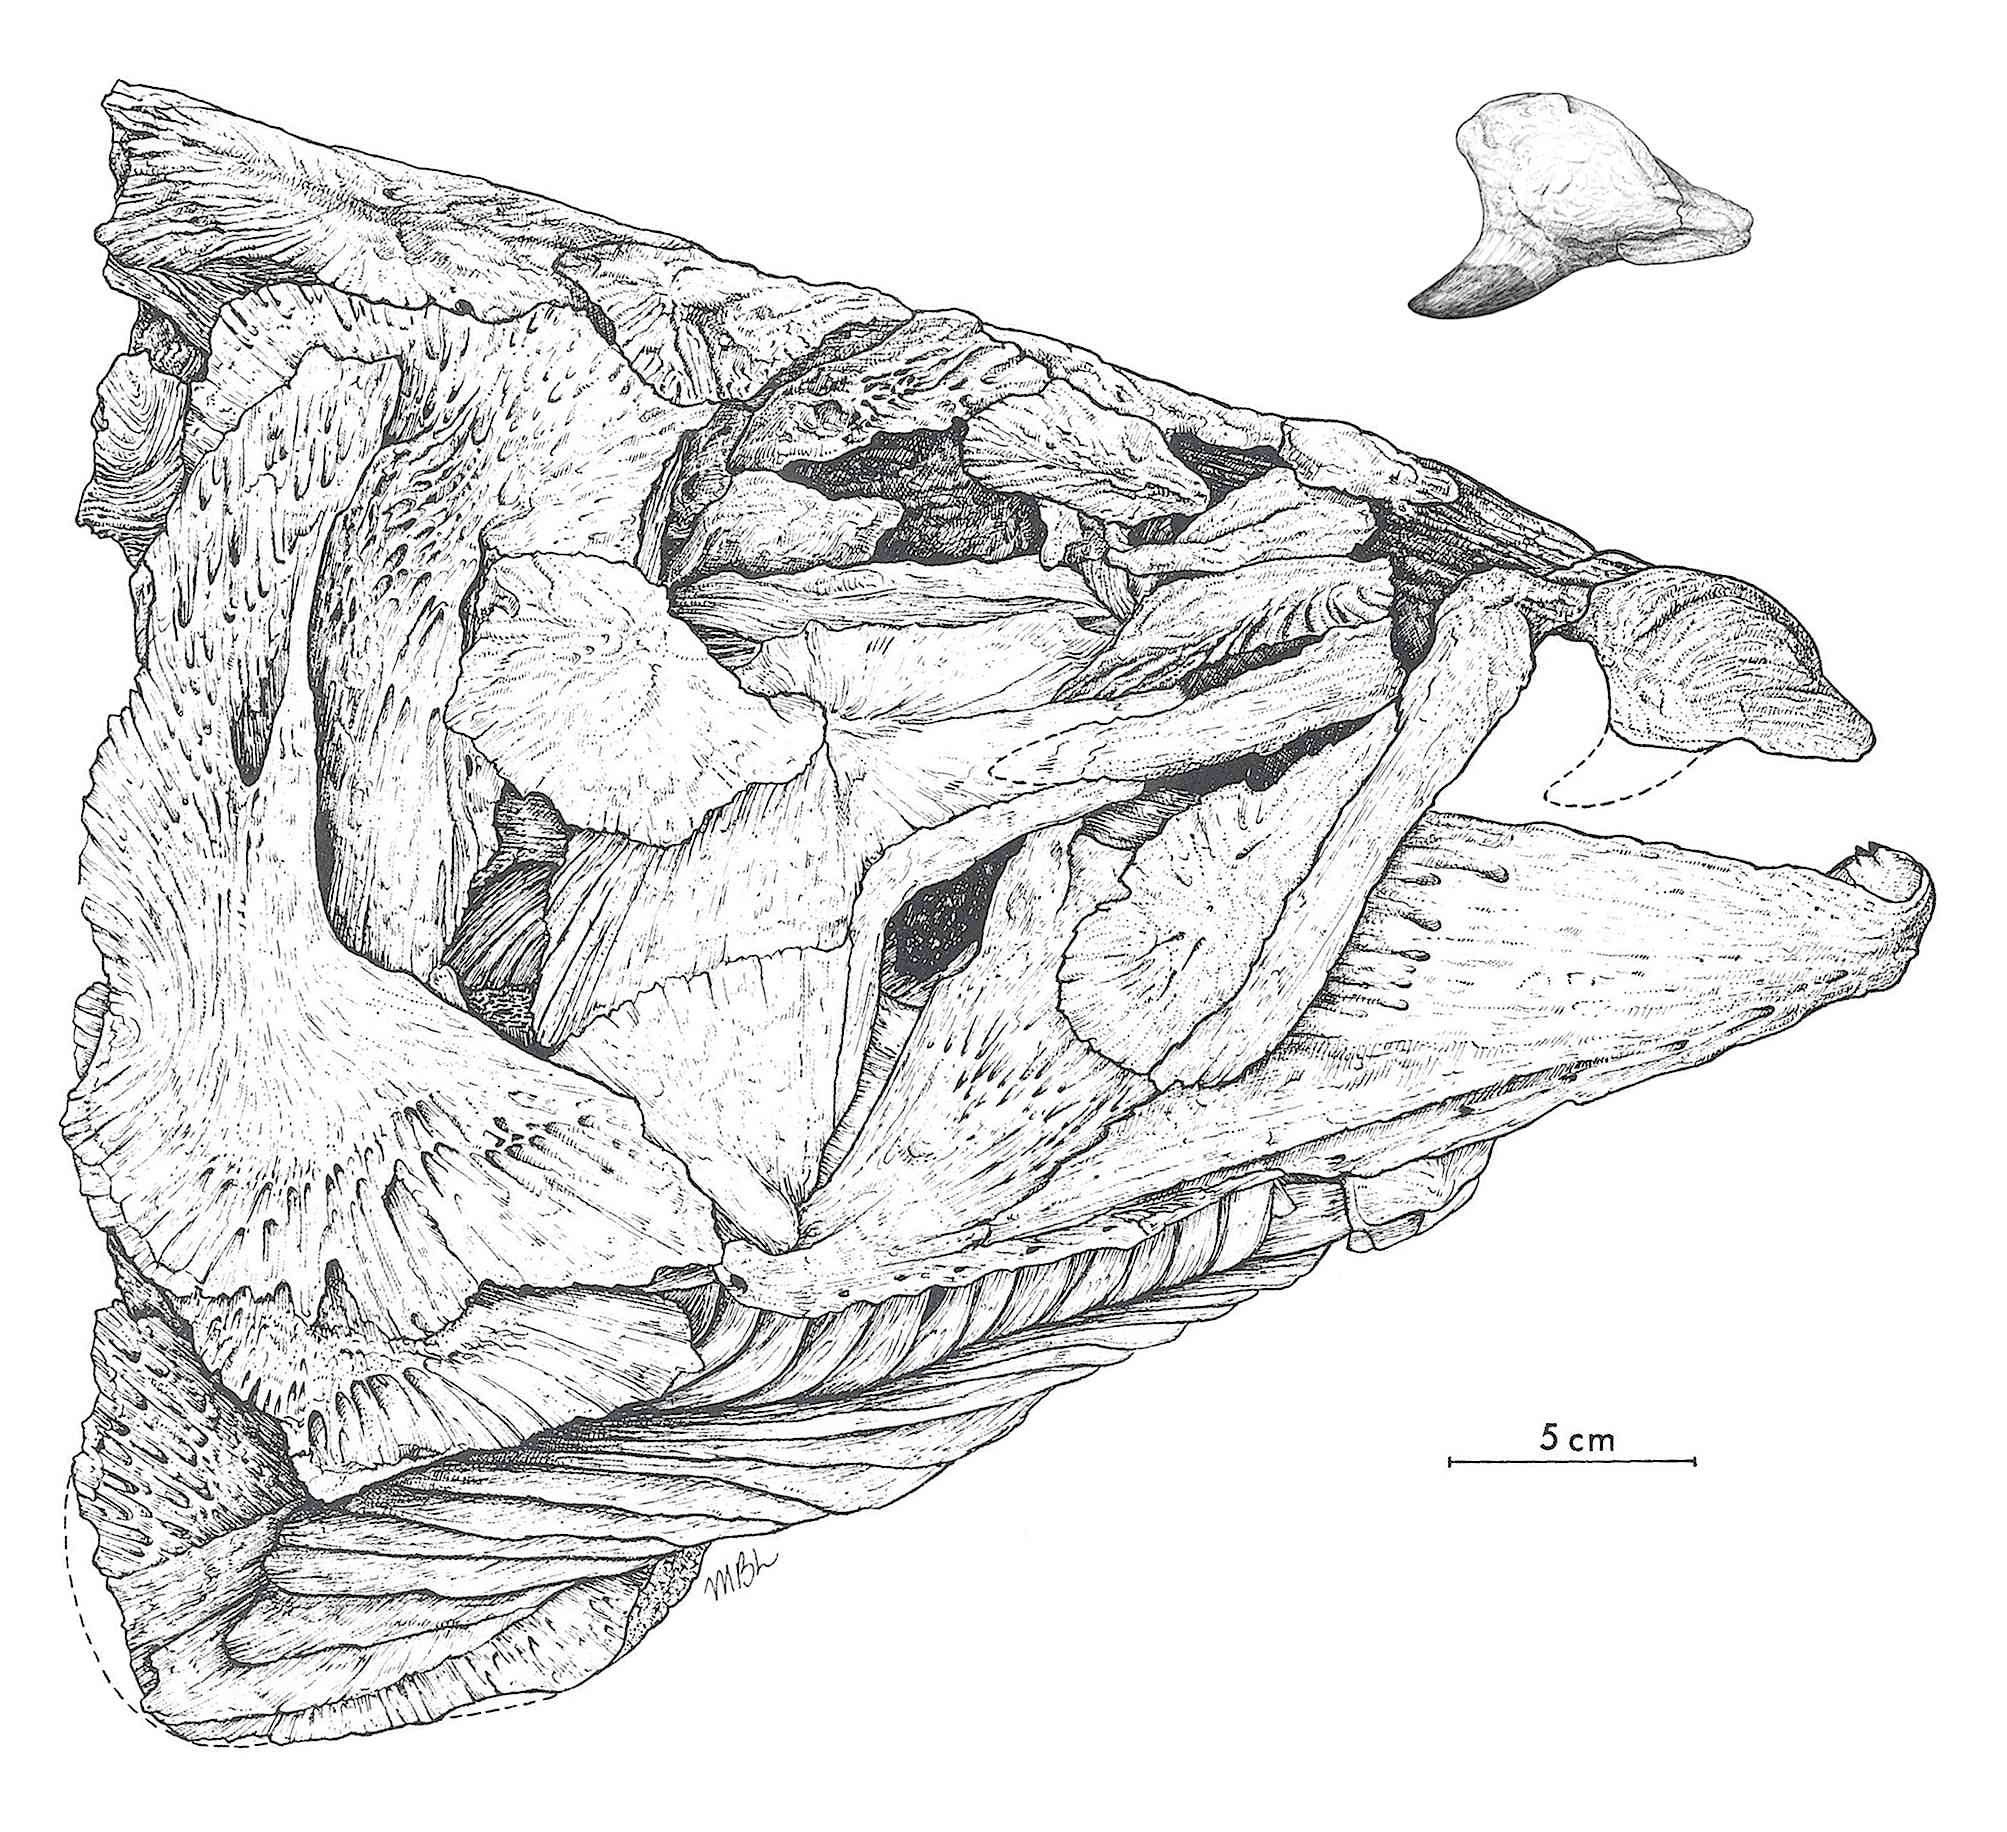 Spike-toothed salmon skull and tooth drawing